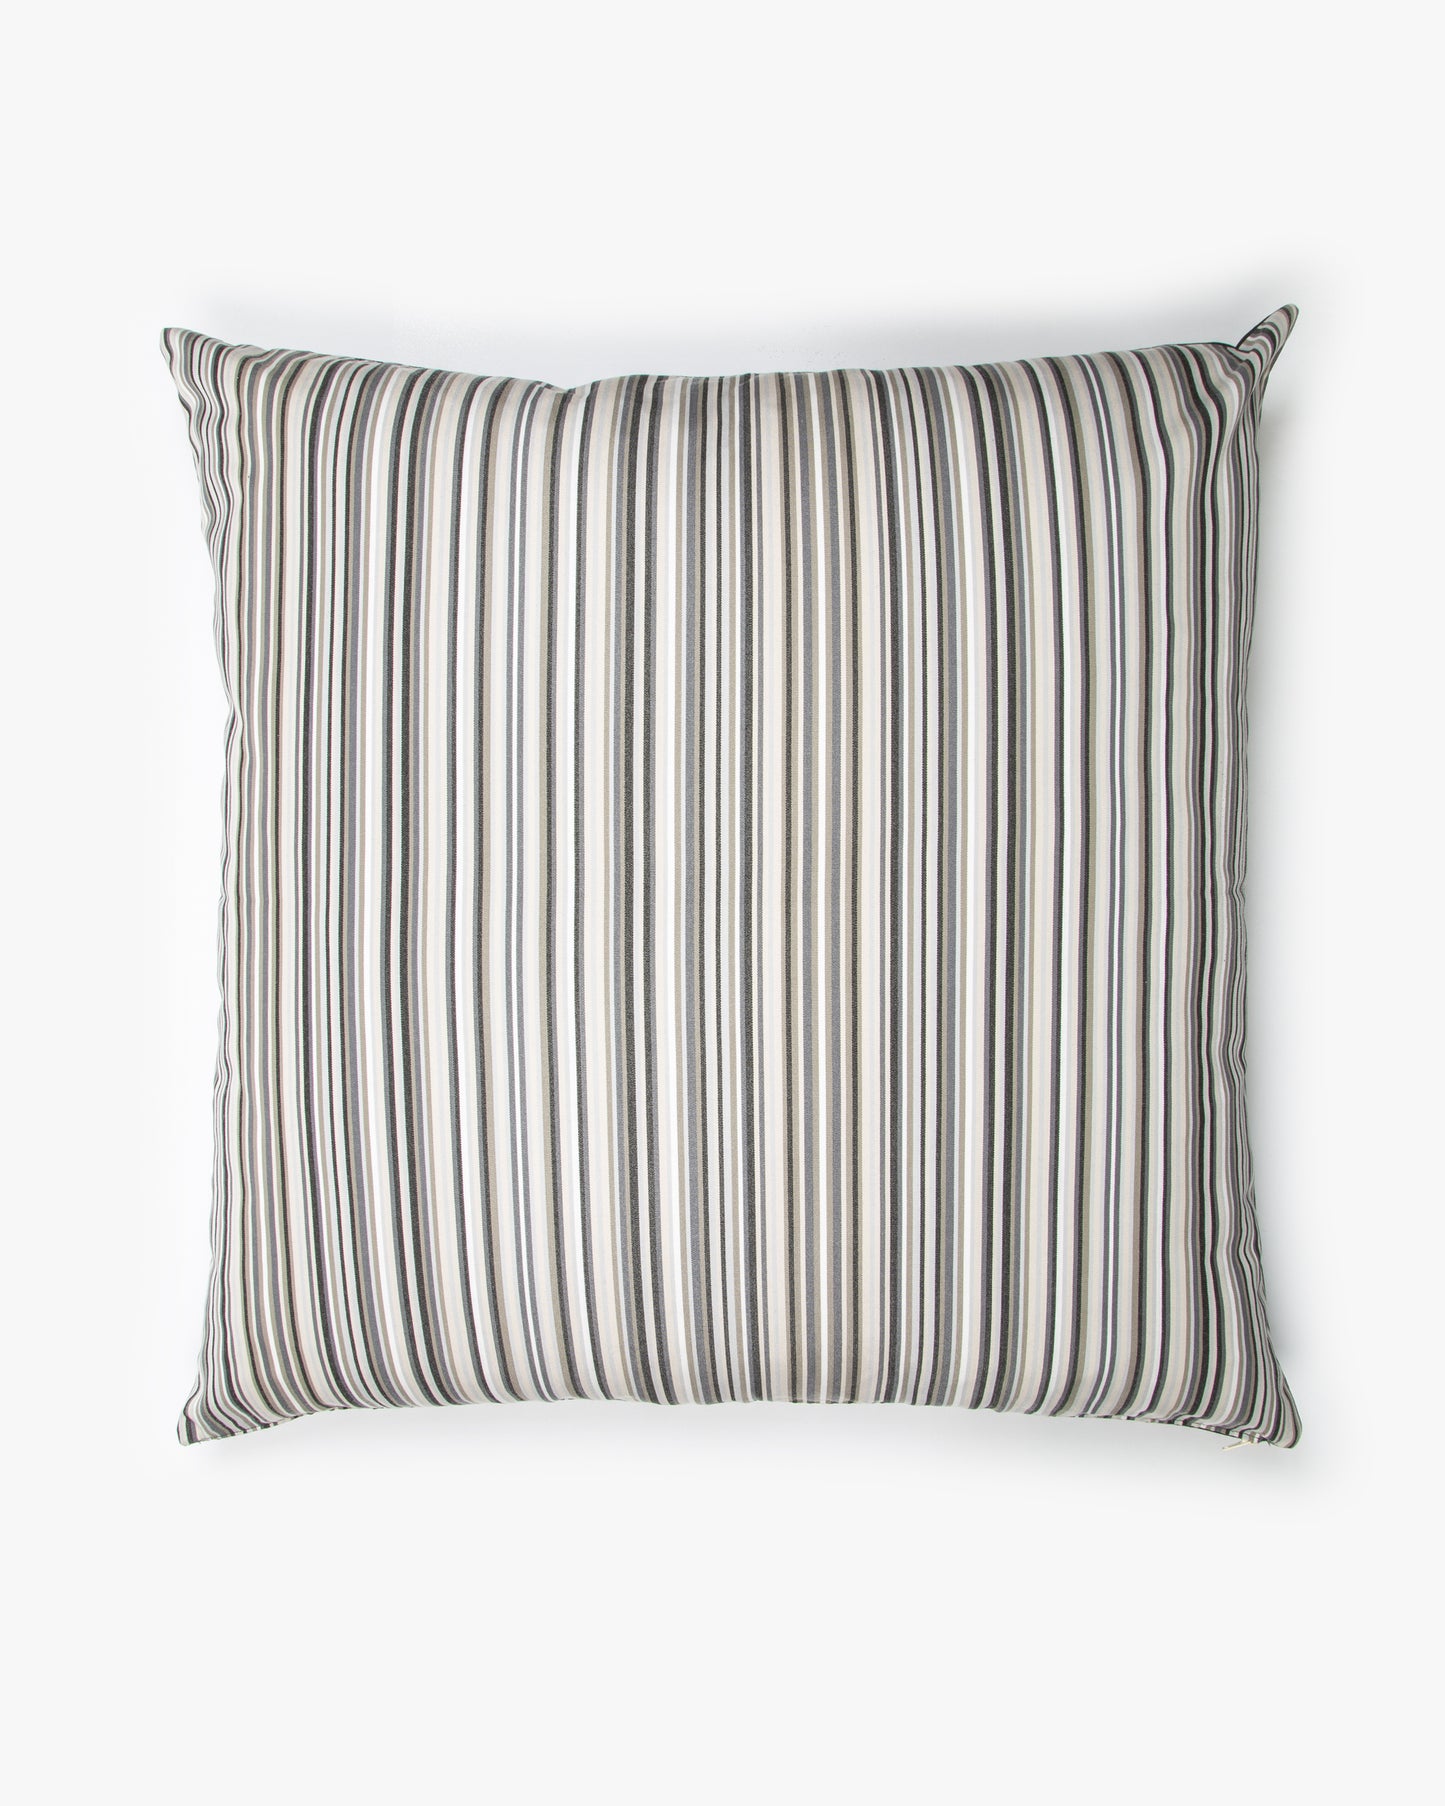 Yachting Stripe Floor Cushion Cover